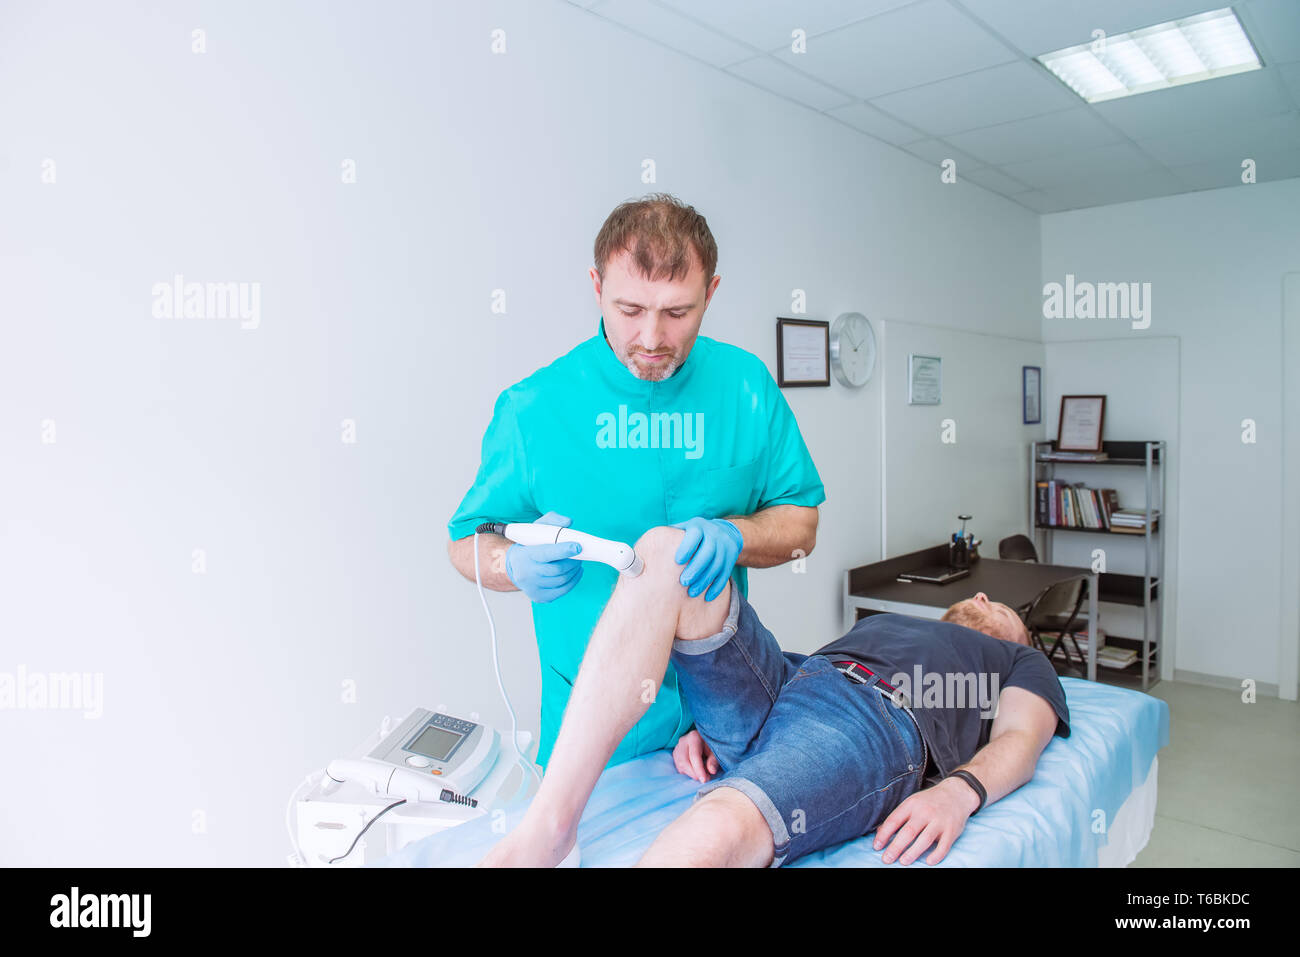 Young man receiving laser or magnet therapy massage on a knee to less pain. A chiropractor treats patient's knee-joint in medical office. Neurology, O Stock Photo